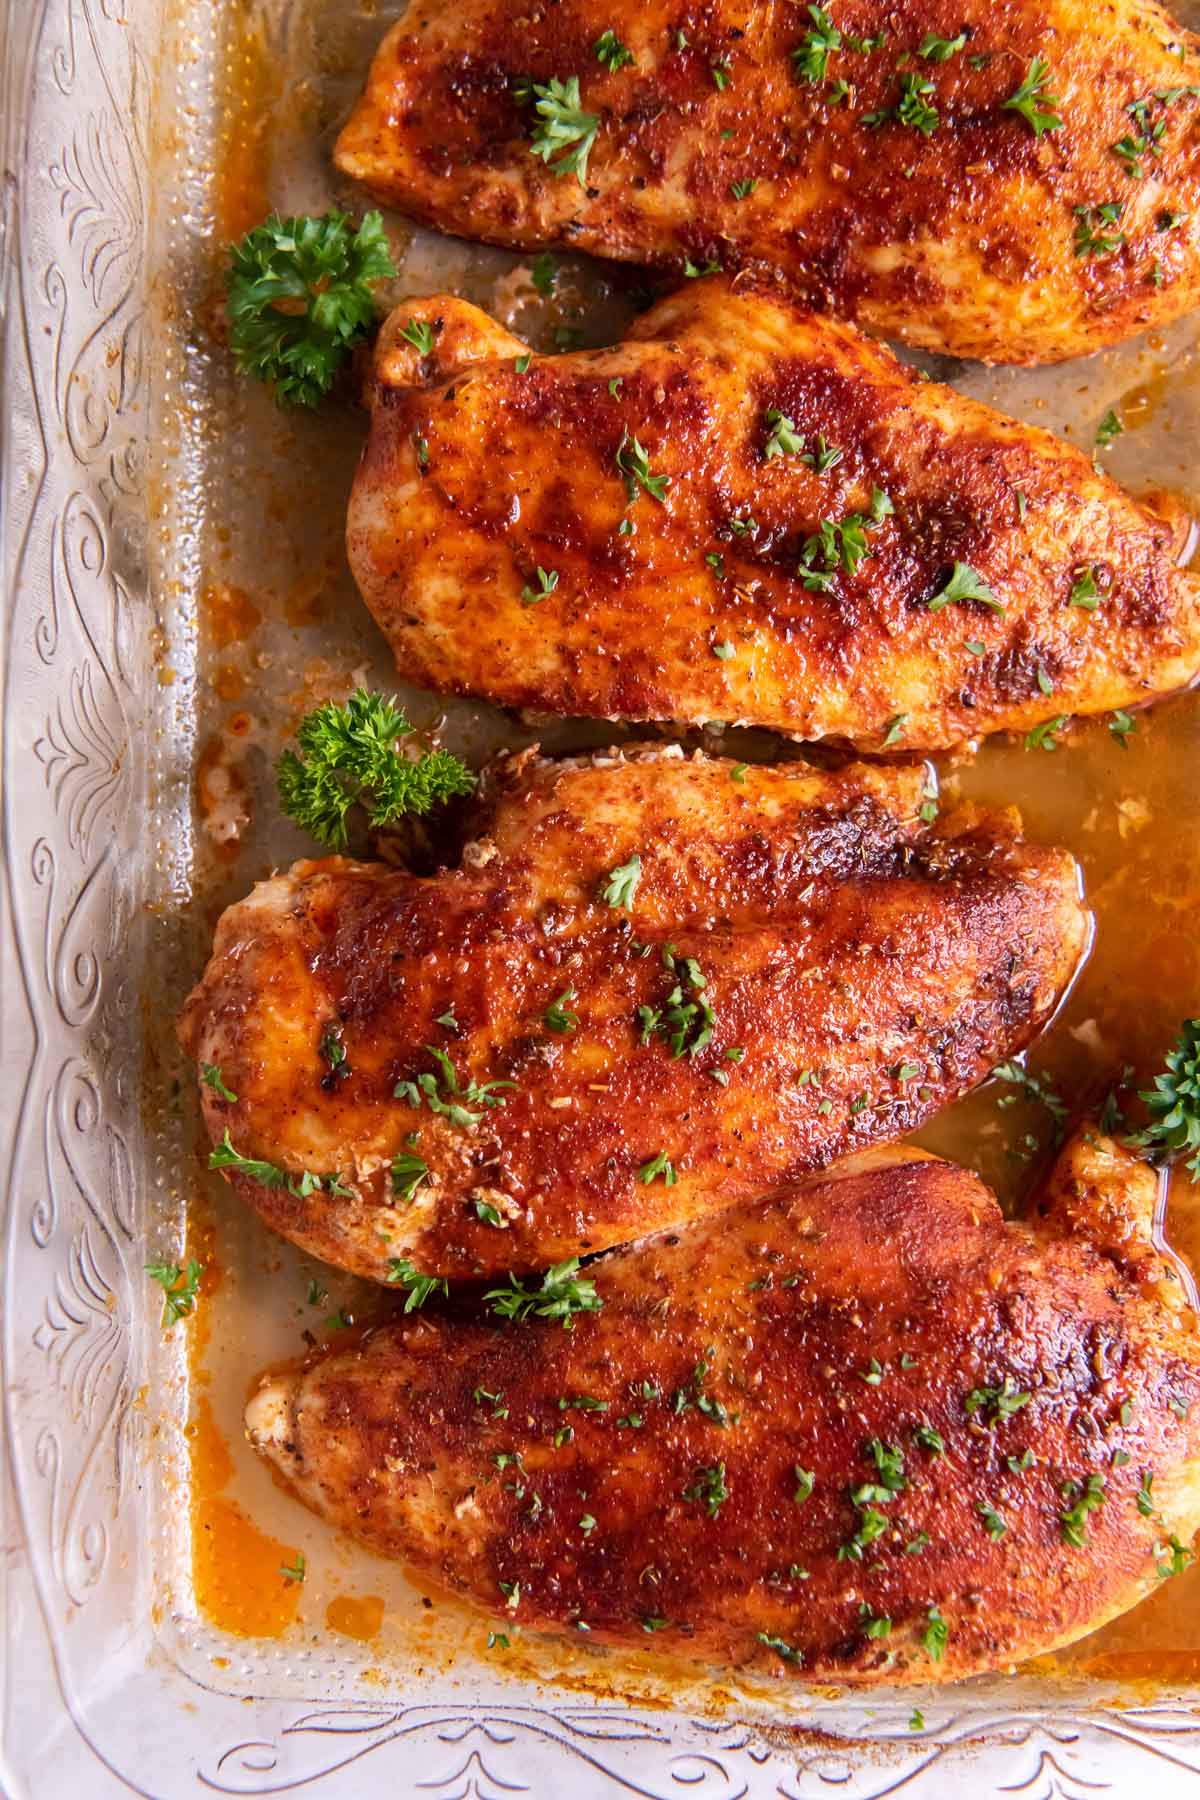 Four baked chicken breasts in a baking dish.